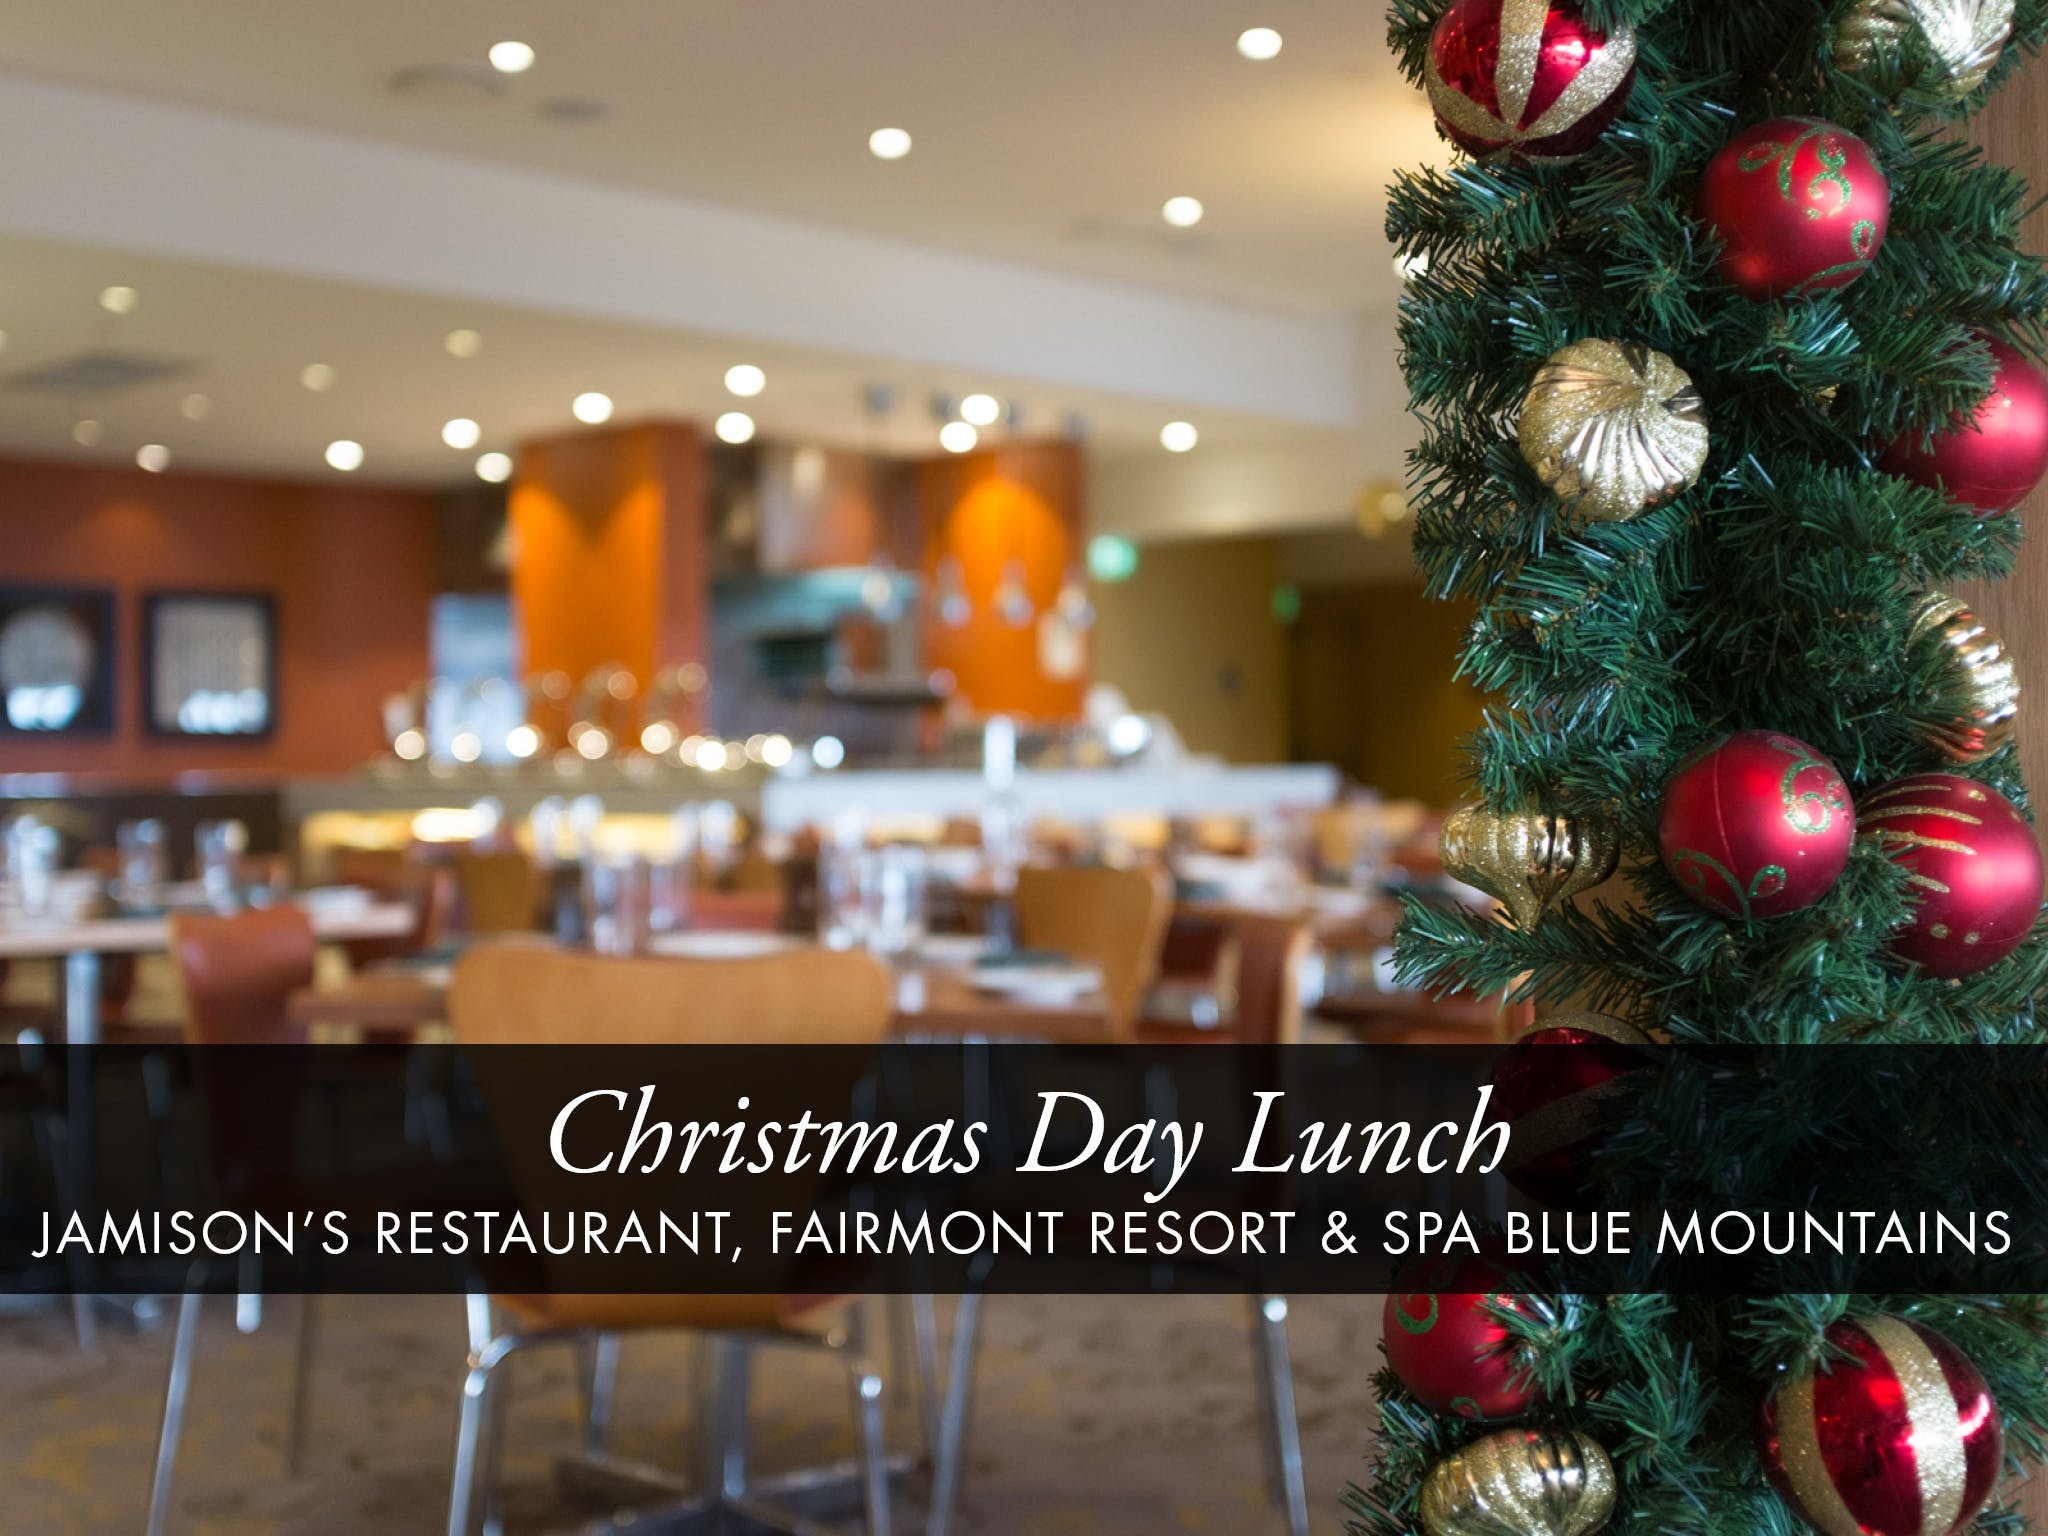 Christmas Day Buffet Lunch at Jamison's Restaurant - Pubs Sydney